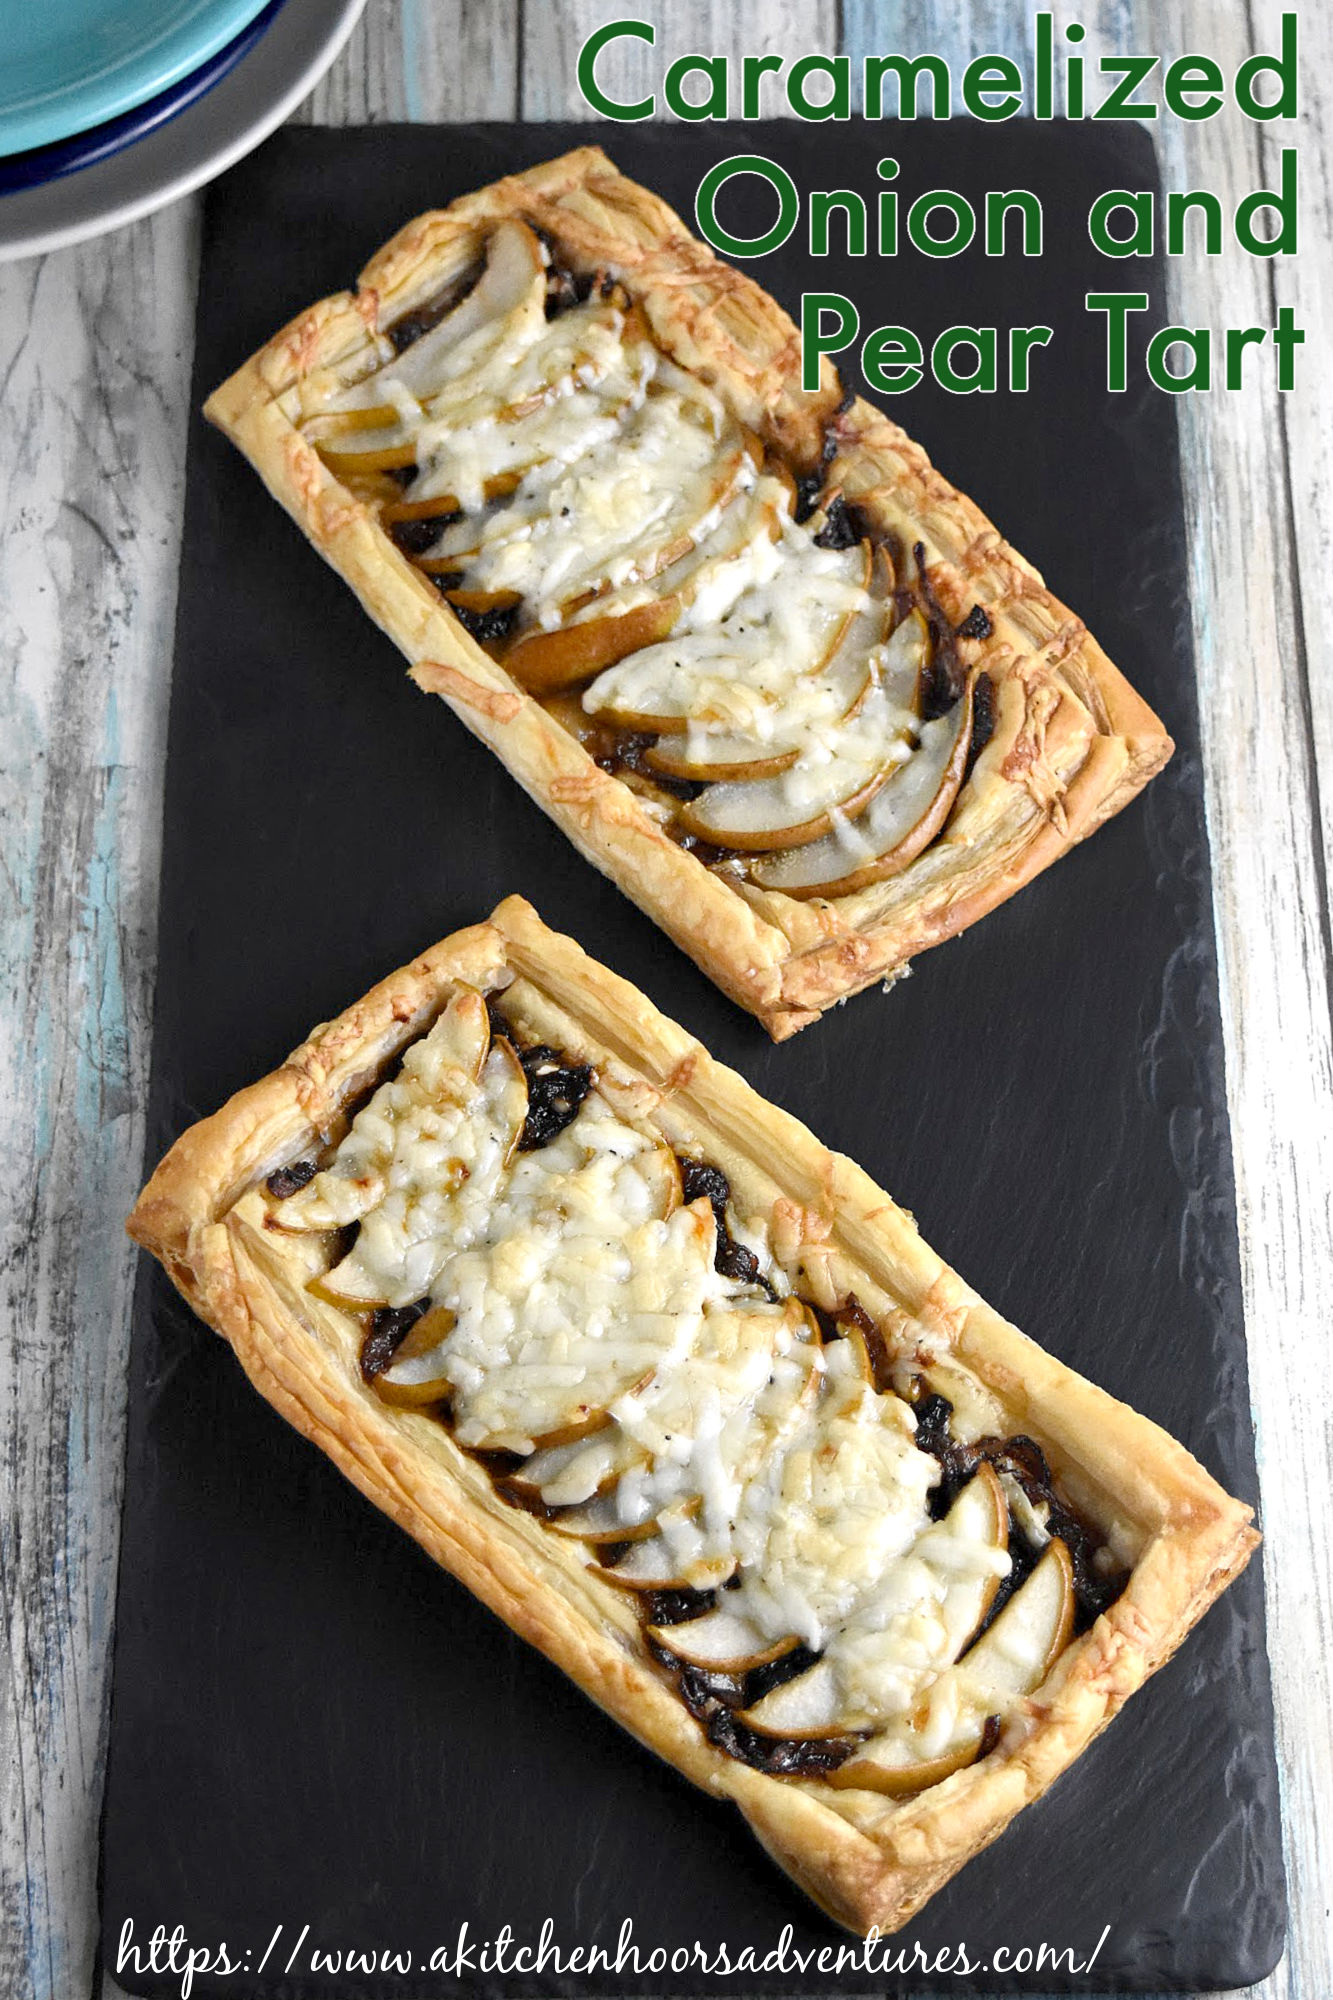 Caramelized Onion and Pear Tart is a perfect New Year’s finger food!  Sweet, caramelized onions, pears, and truffle goat cheese come together in puff pastry for a delicious appetizer. #OurFamilyTable